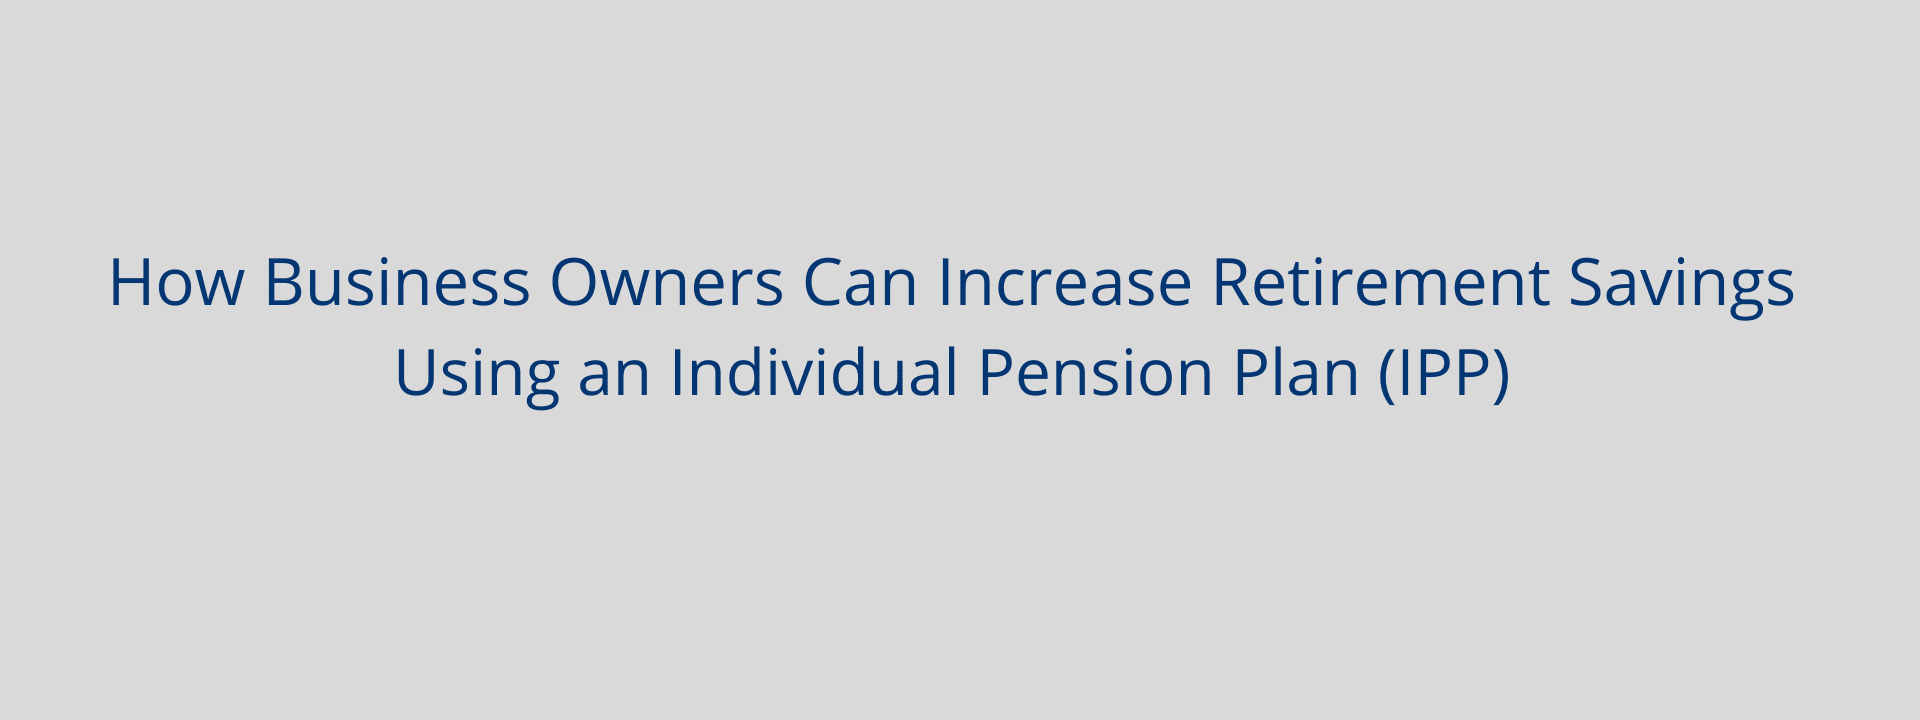 An Individual Pension Plan (IPP) is a great retirement tool